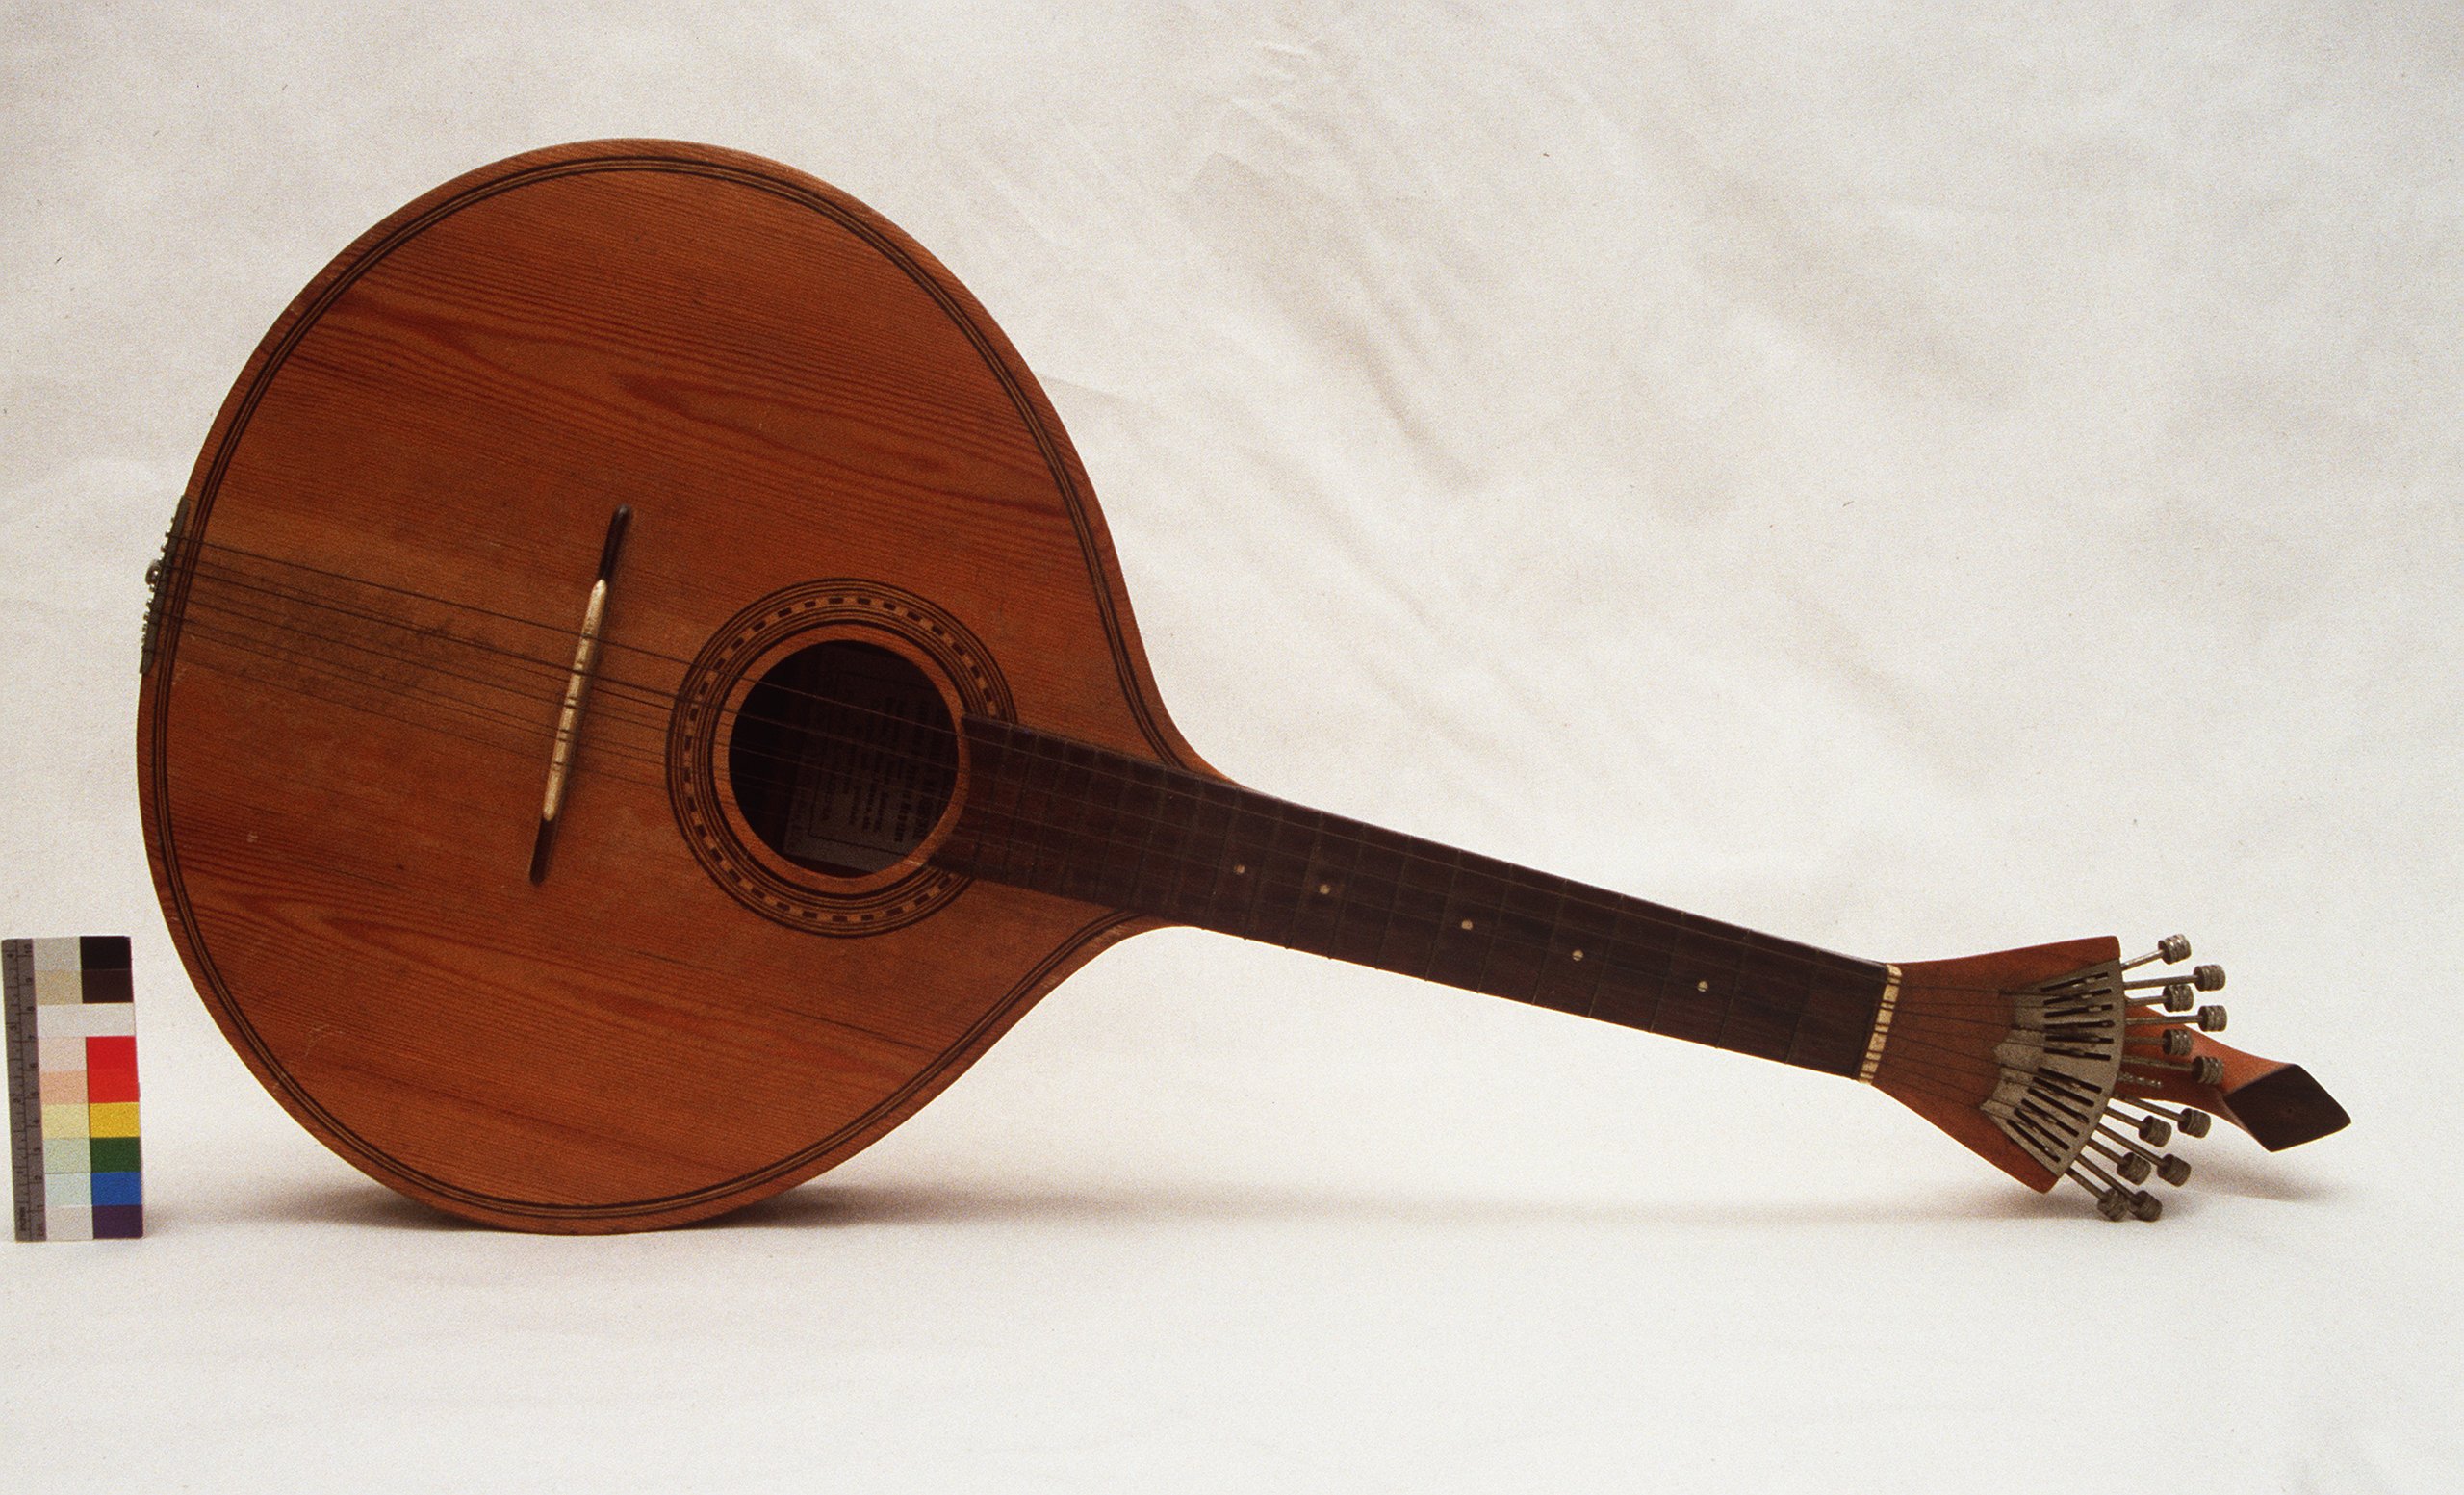 Cavaco Portuguese guitar used by the Jandaschewsky family musical clowns